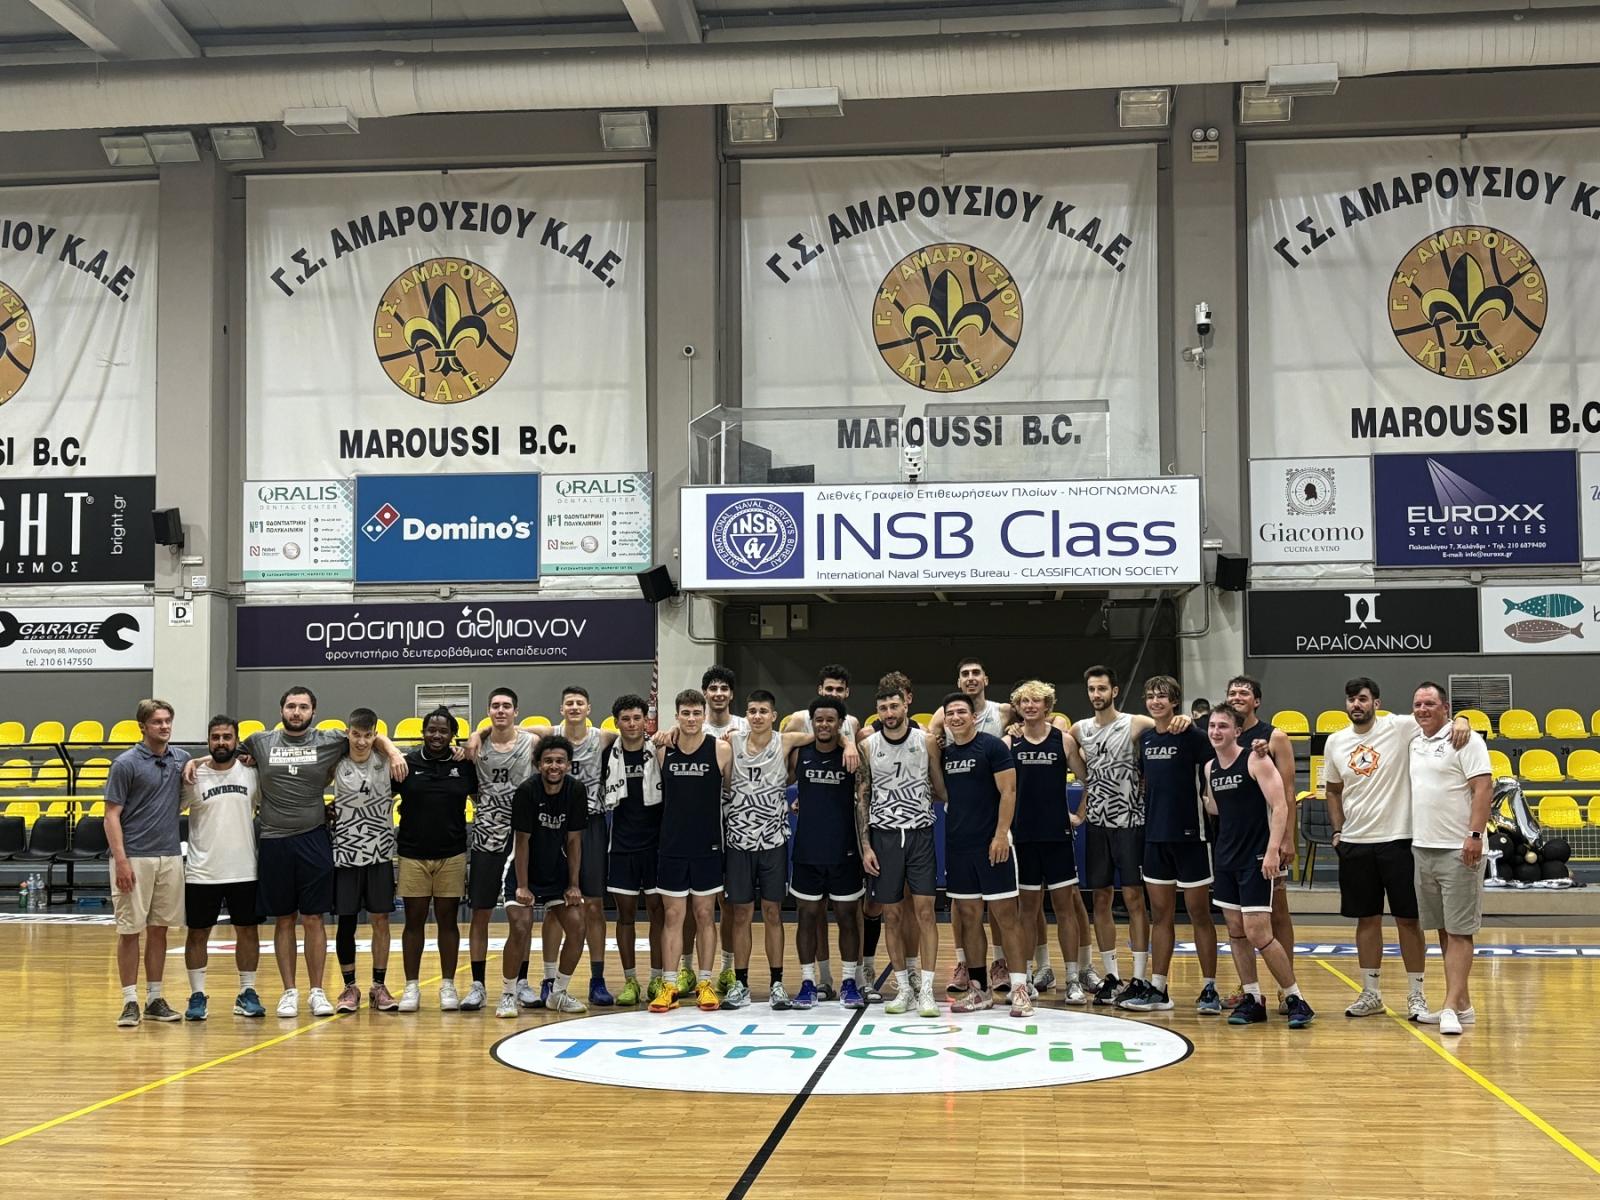 Players, coaches, and parents pose for a photo in a gym in Greece.